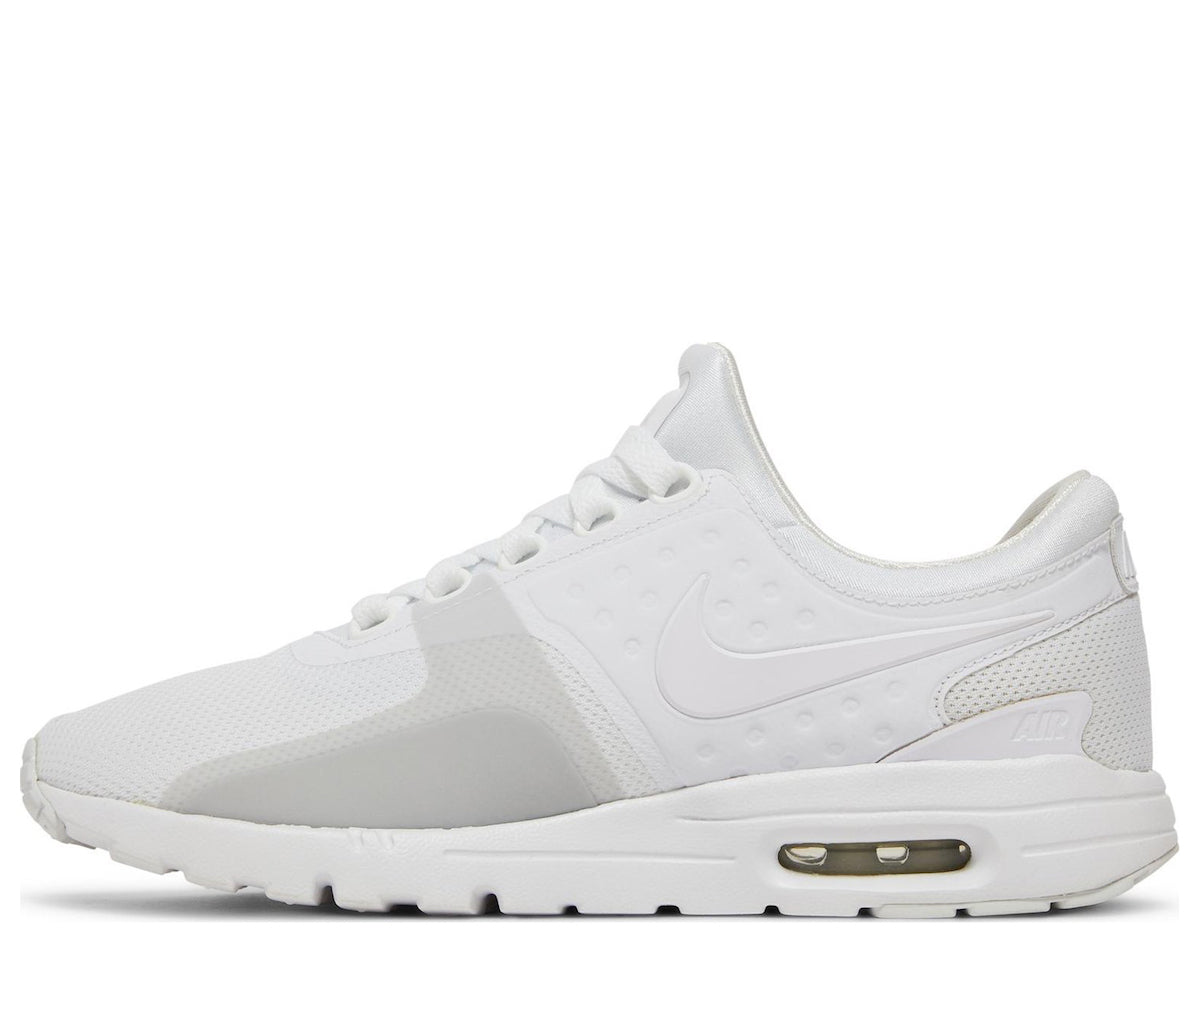 Nike-OUTLET-SALE-Air Max Zero Sneakers-ARCHIVIST